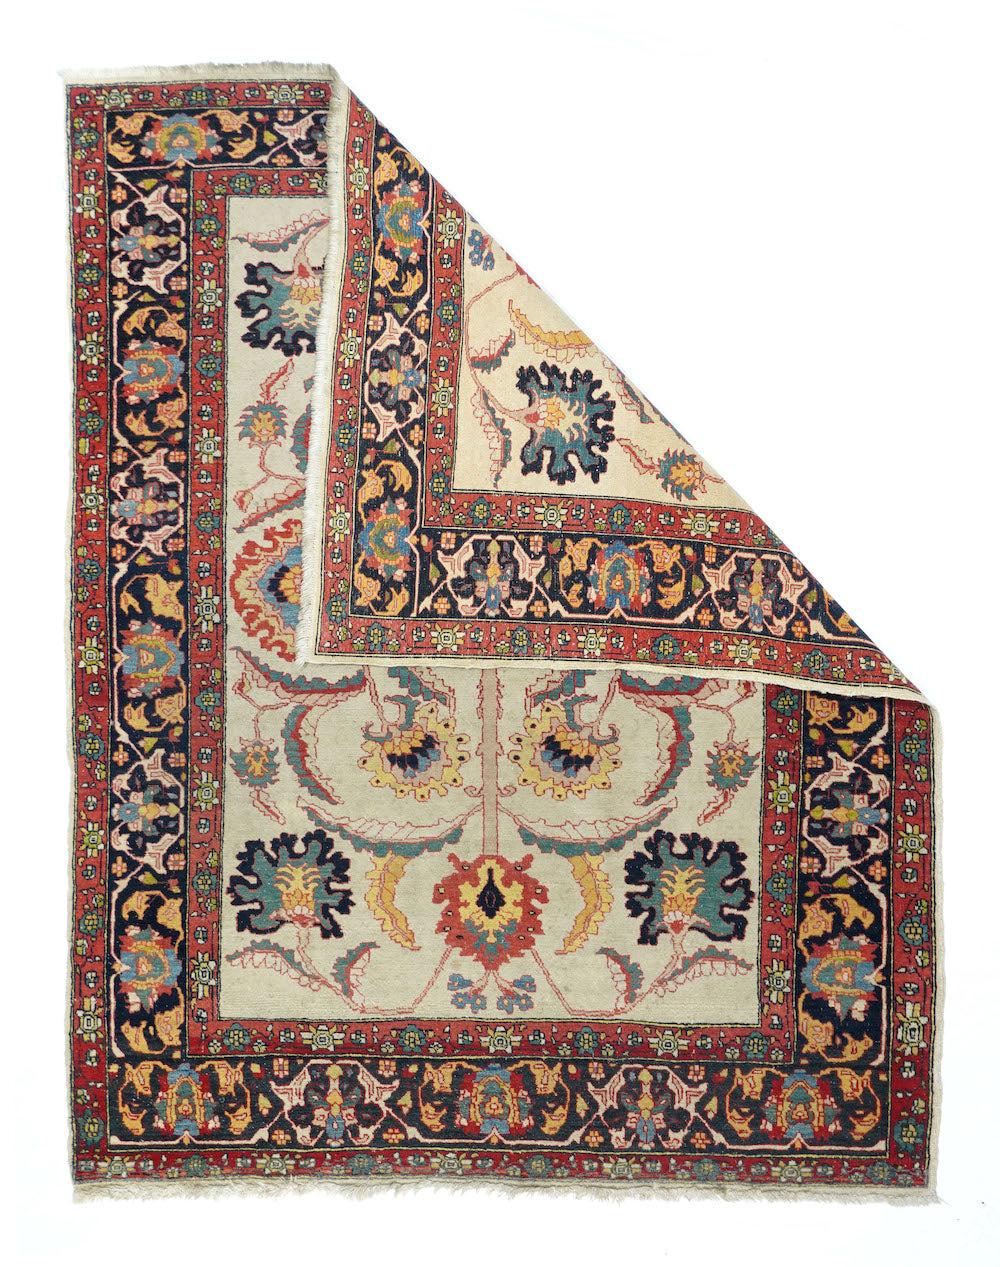 Farahan is a village located in west central Iran, north of the city of Arak, and is known for its finely knotted late 19th century rugs. Most Farahan rugs have a geometric pattern, although some curvilinear rugs are woven in the region as well.